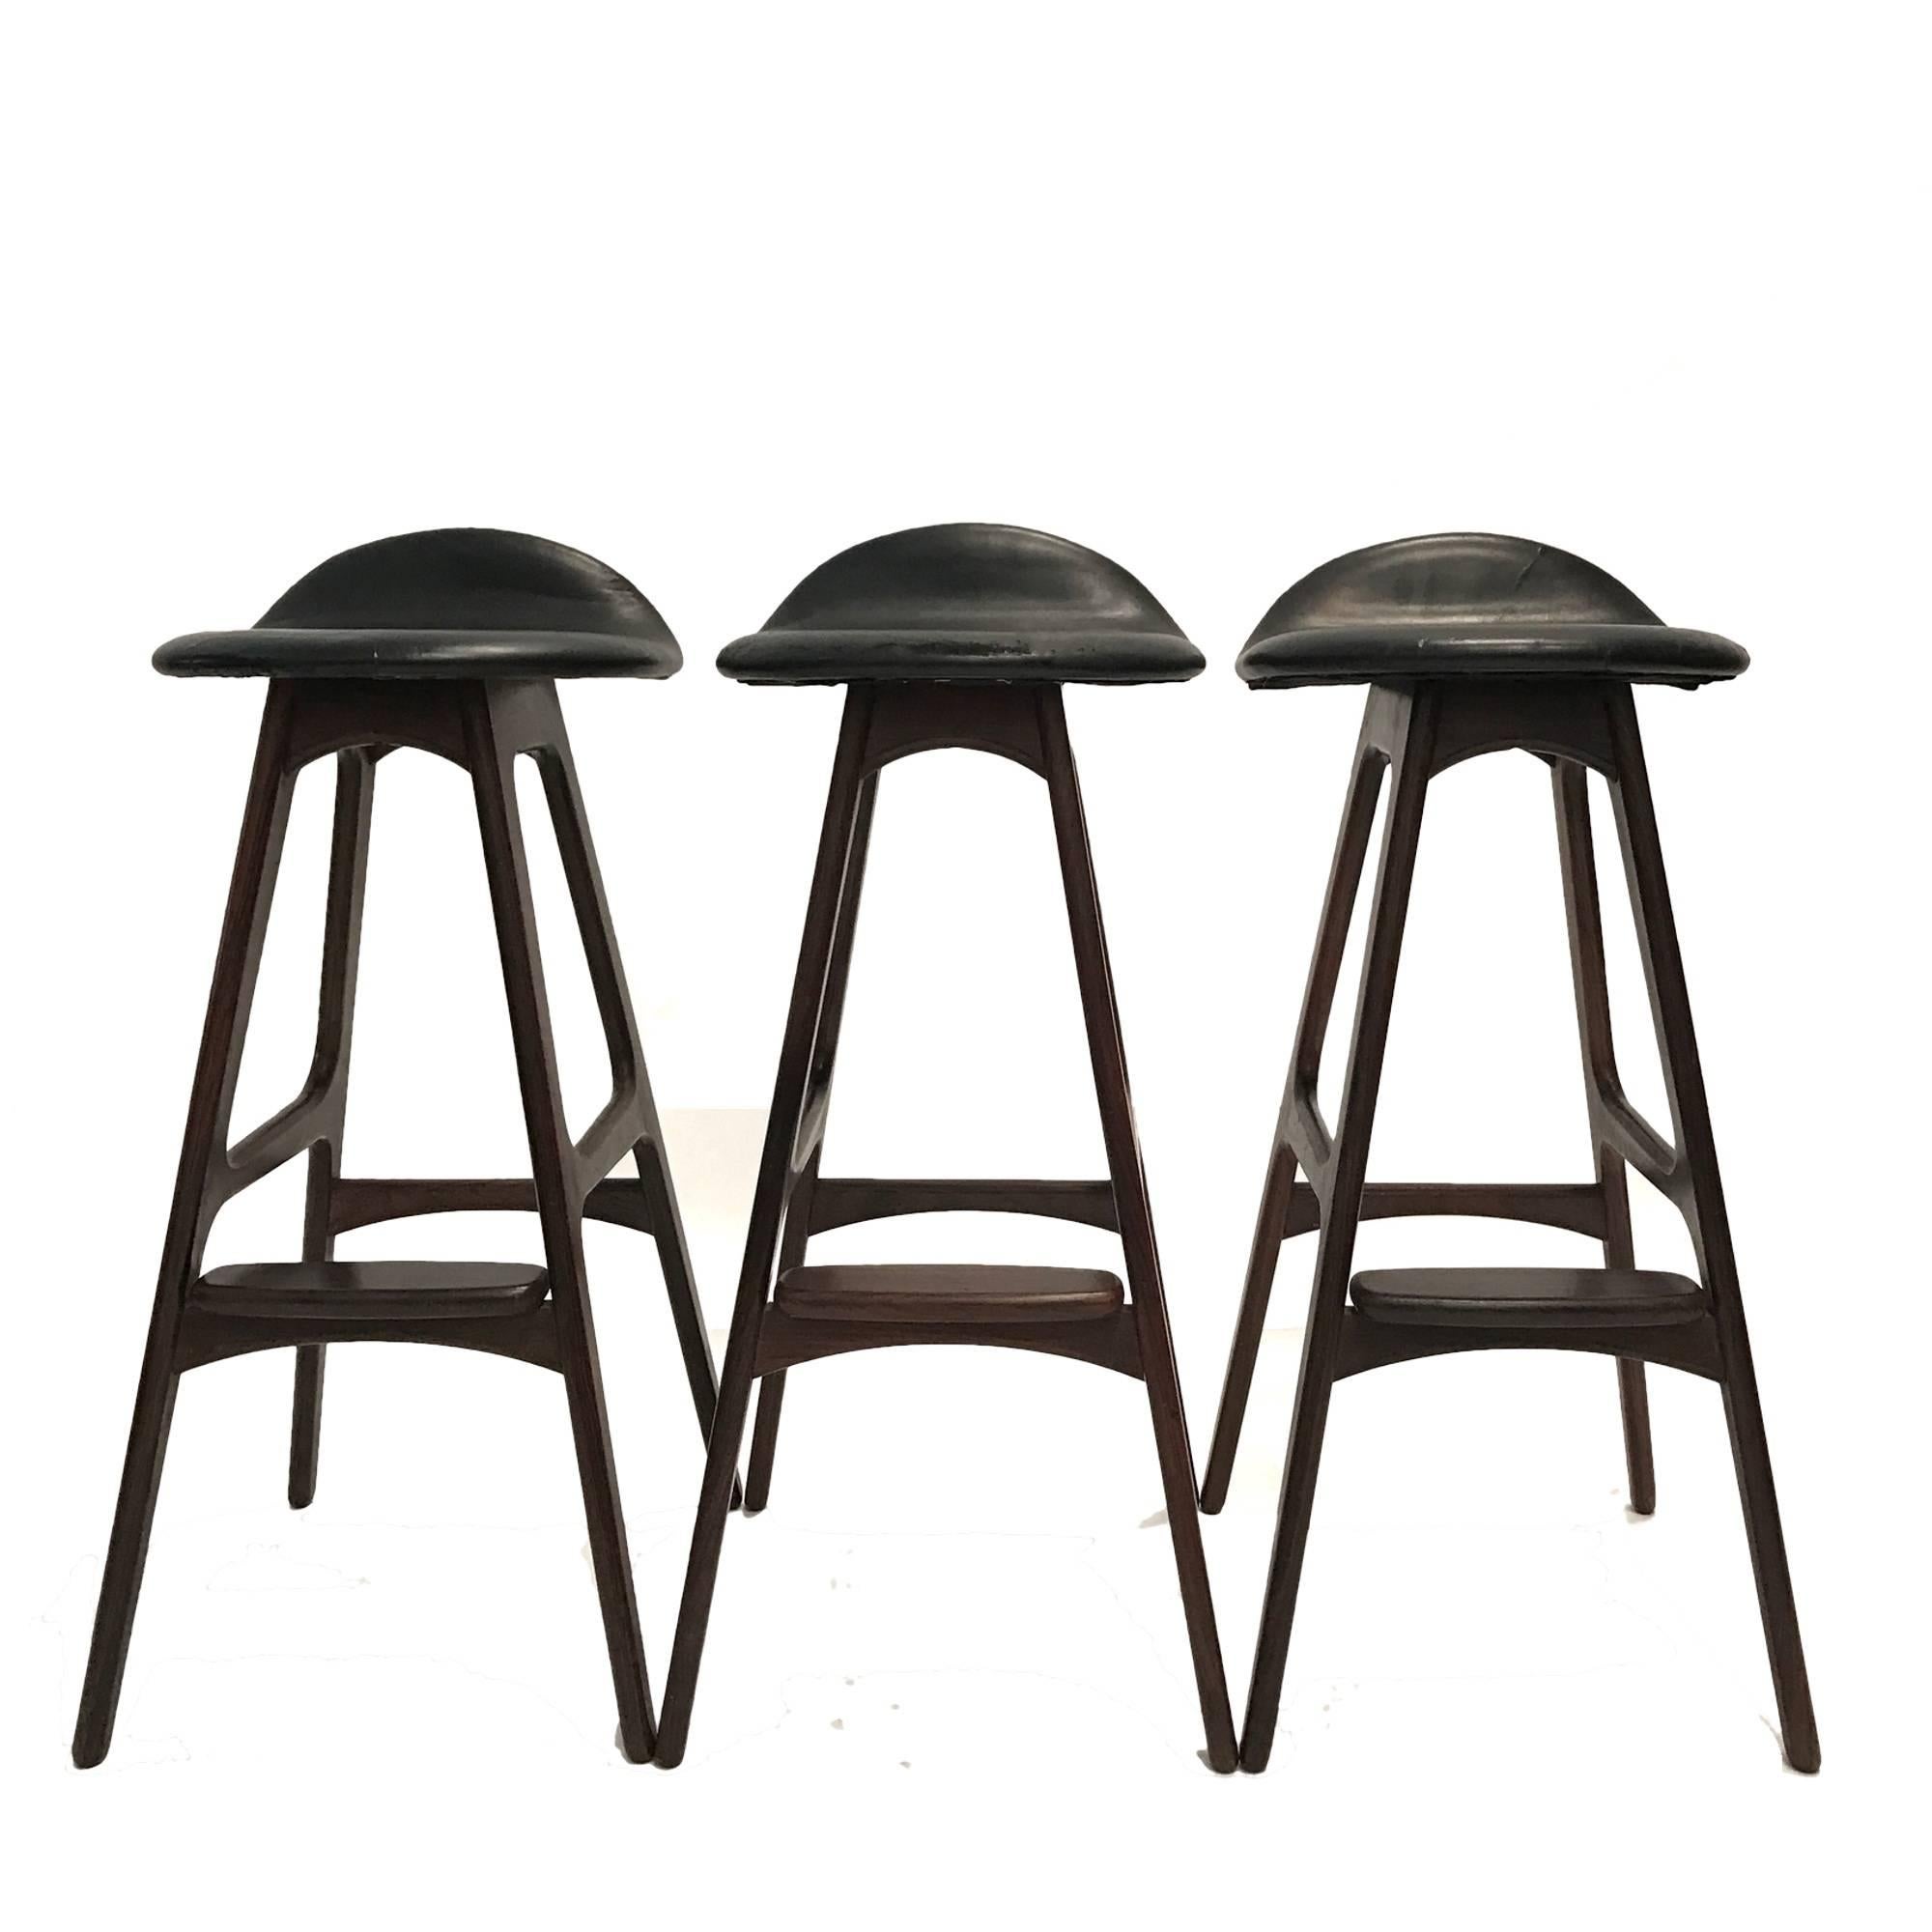 Mid-20th Century Set of Three Vintage Danish Barstools by Erik Buch in Rosewood and Black Leather